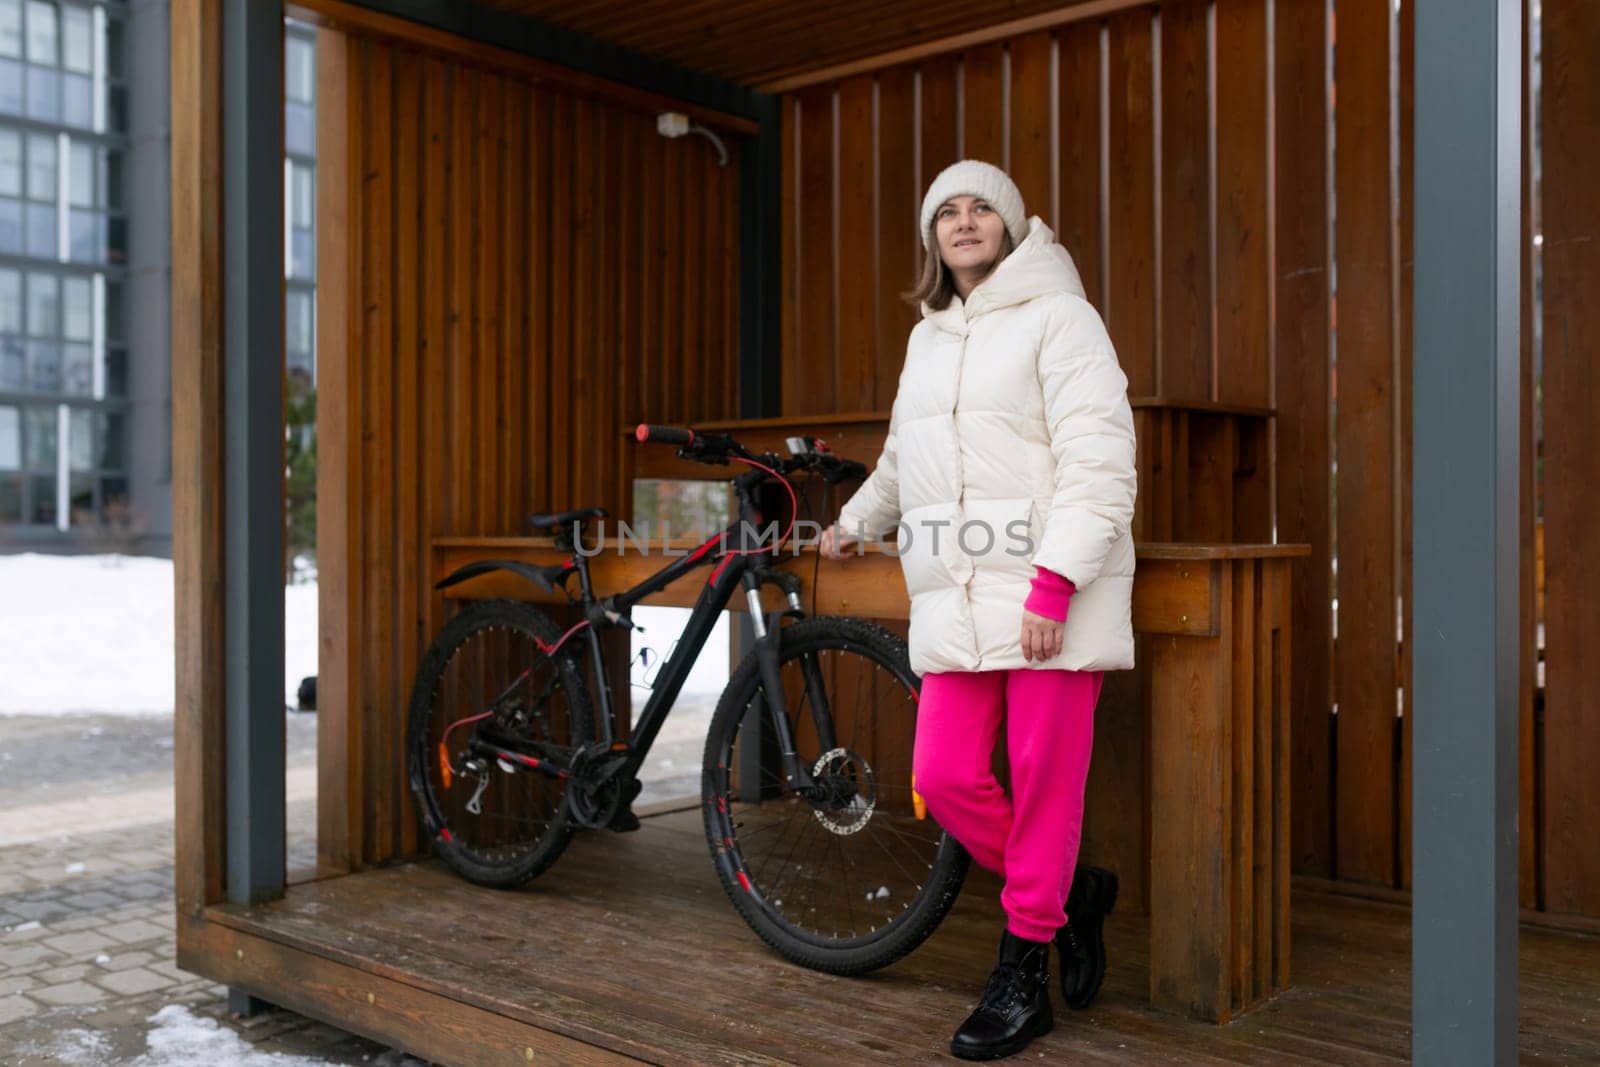 A woman wearing a white jacket is standing next to a bike, looking towards the camera. The bike is parked on a sidewalk, with buildings in the background.